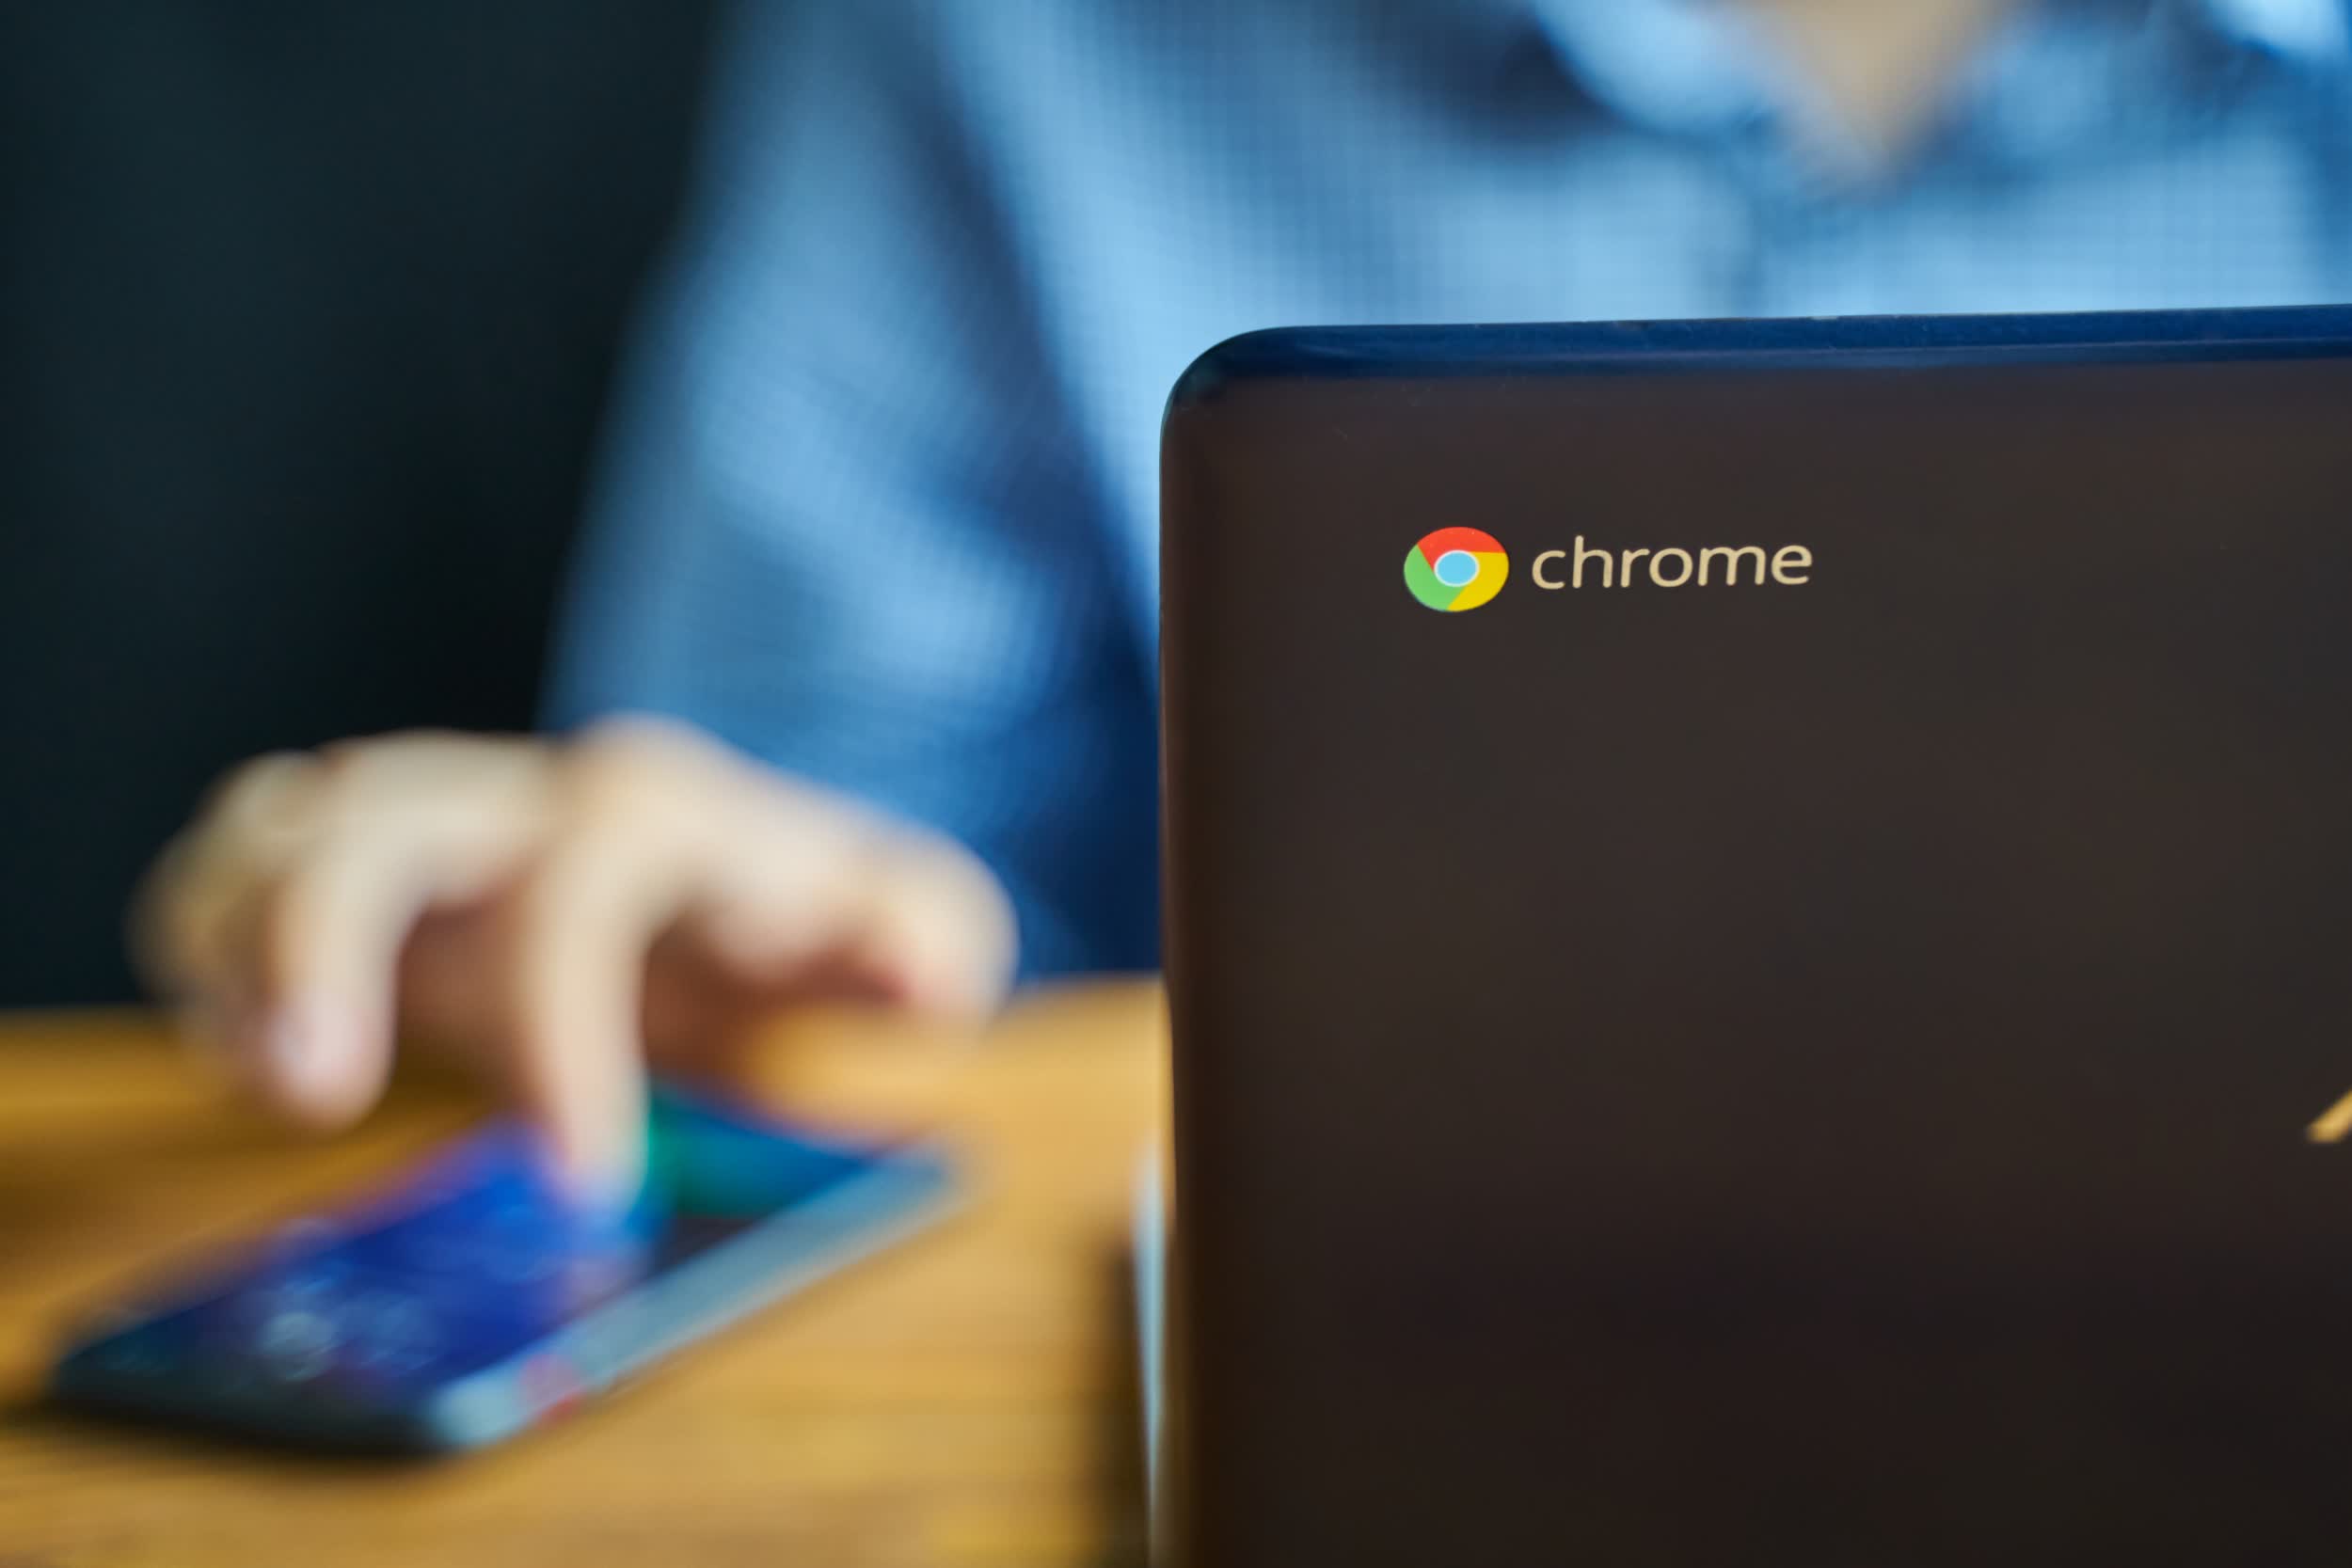 Google wants you to try Chrome OS on your old PC or Mac